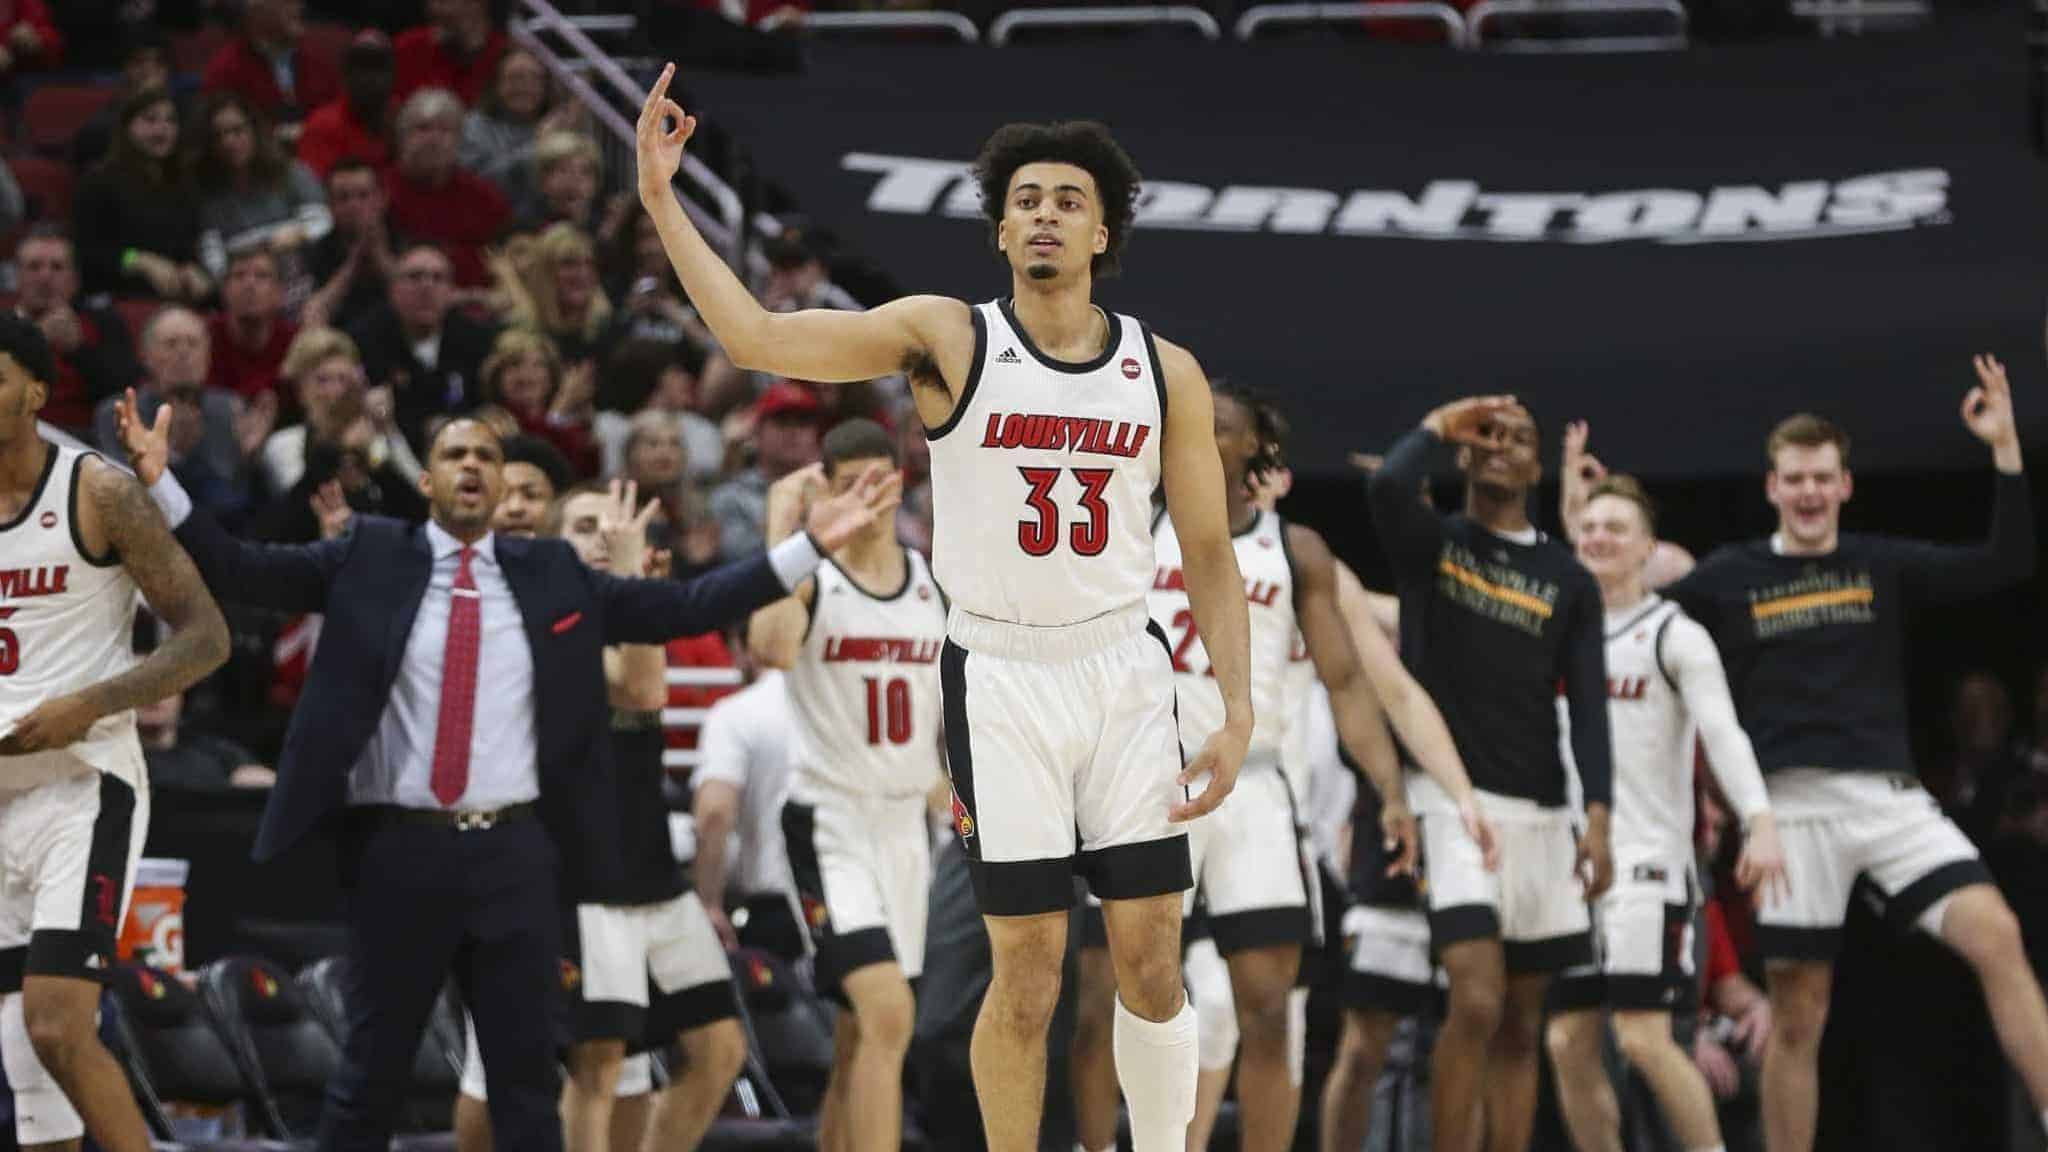 LOUISVILLE, KENTUCKY - FEBRUARY 08: Jordan Nwora #33 of the Louisville Cardinals celebrates after making a three-point shot against the Virginia Cavaliers during the first half of the game at KFC YUM! Center on February 08, 2020 in Louisville, Kentucky.